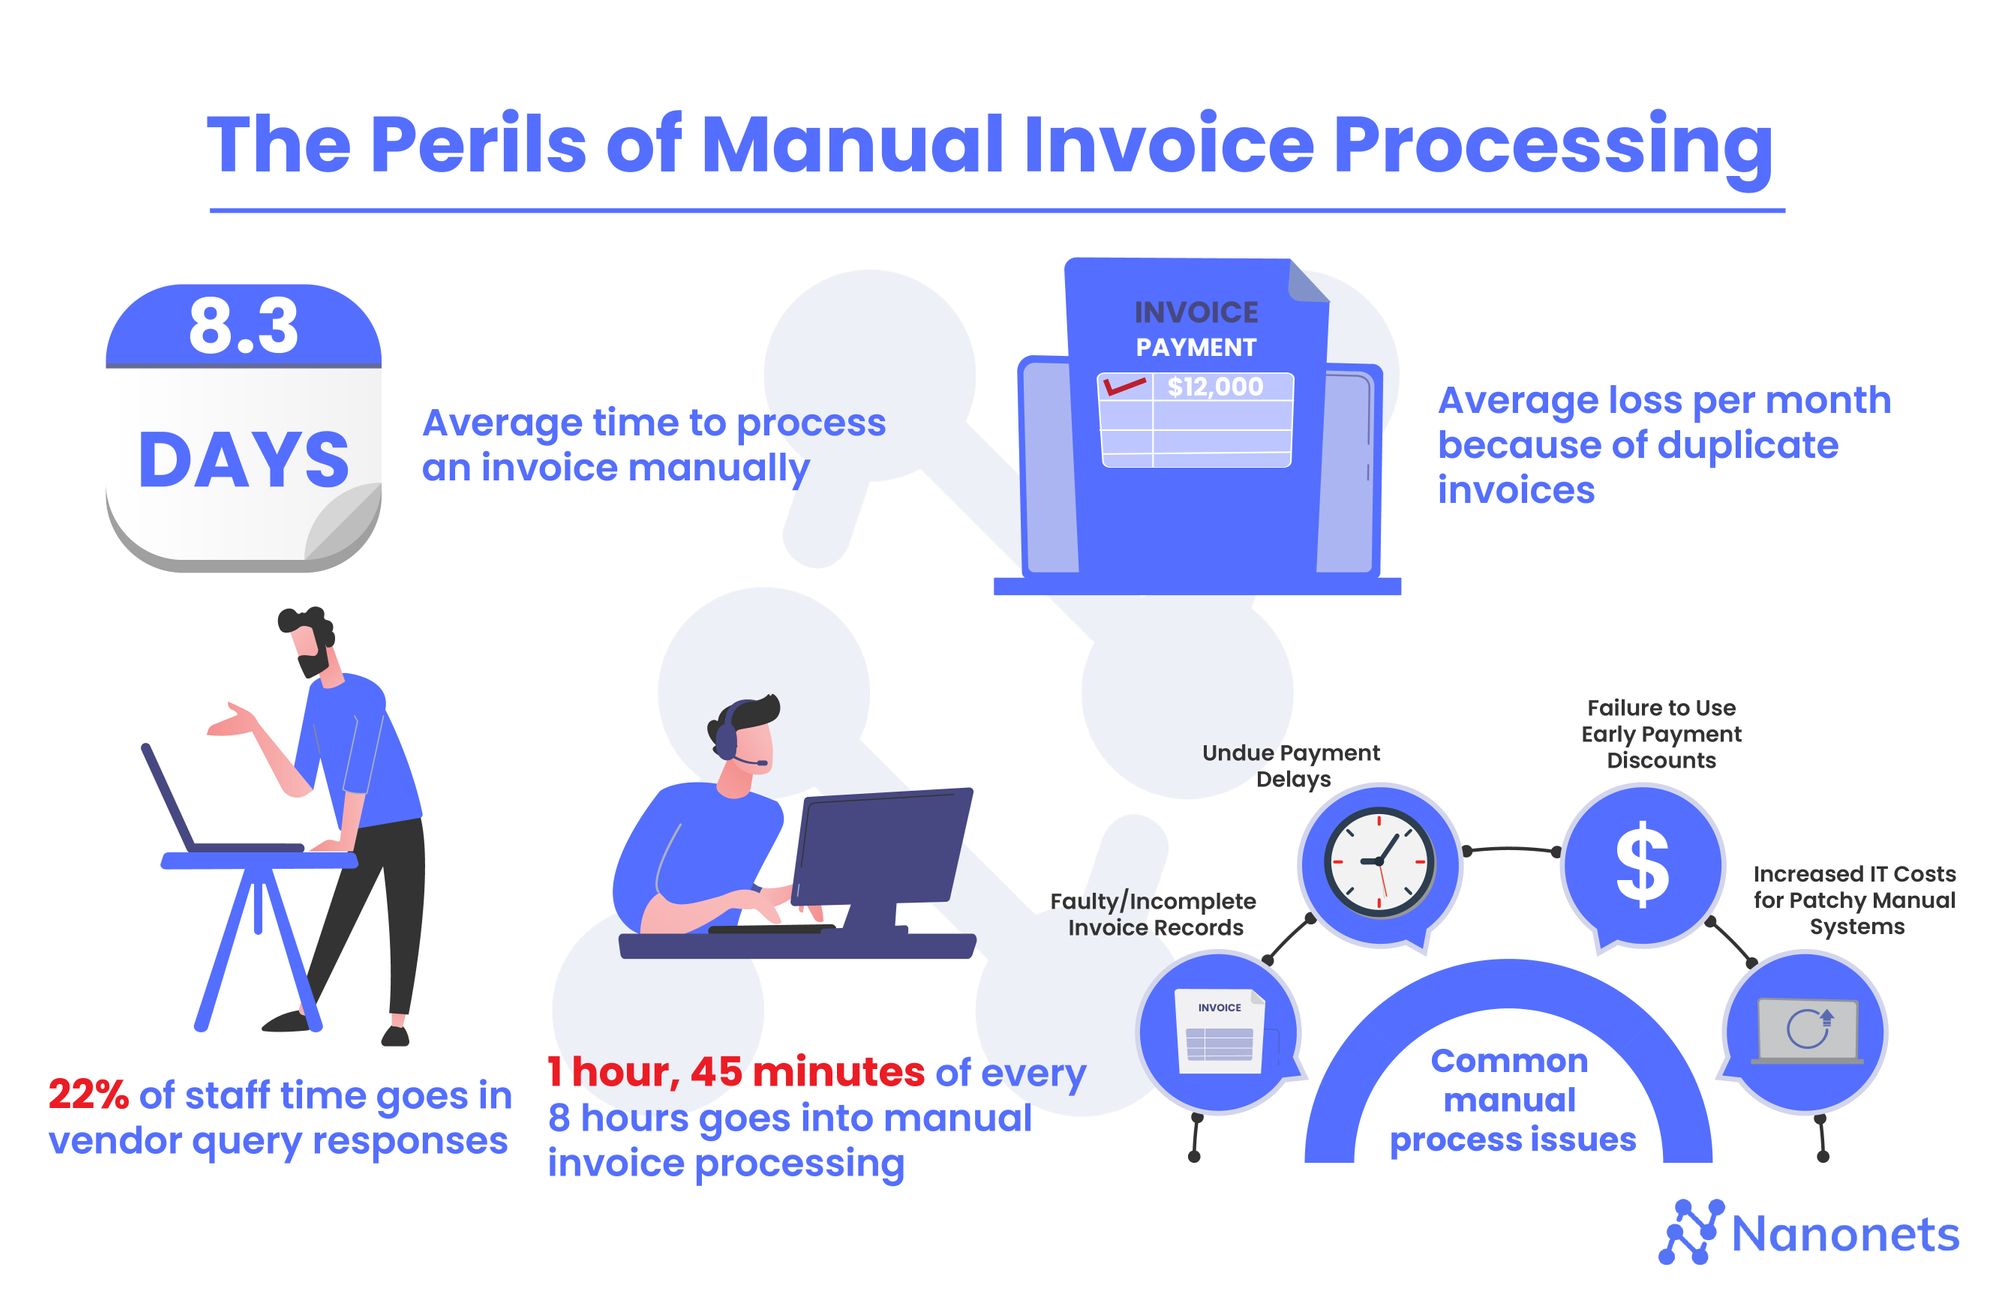 Invoice Routing - Manual Process Painpoints